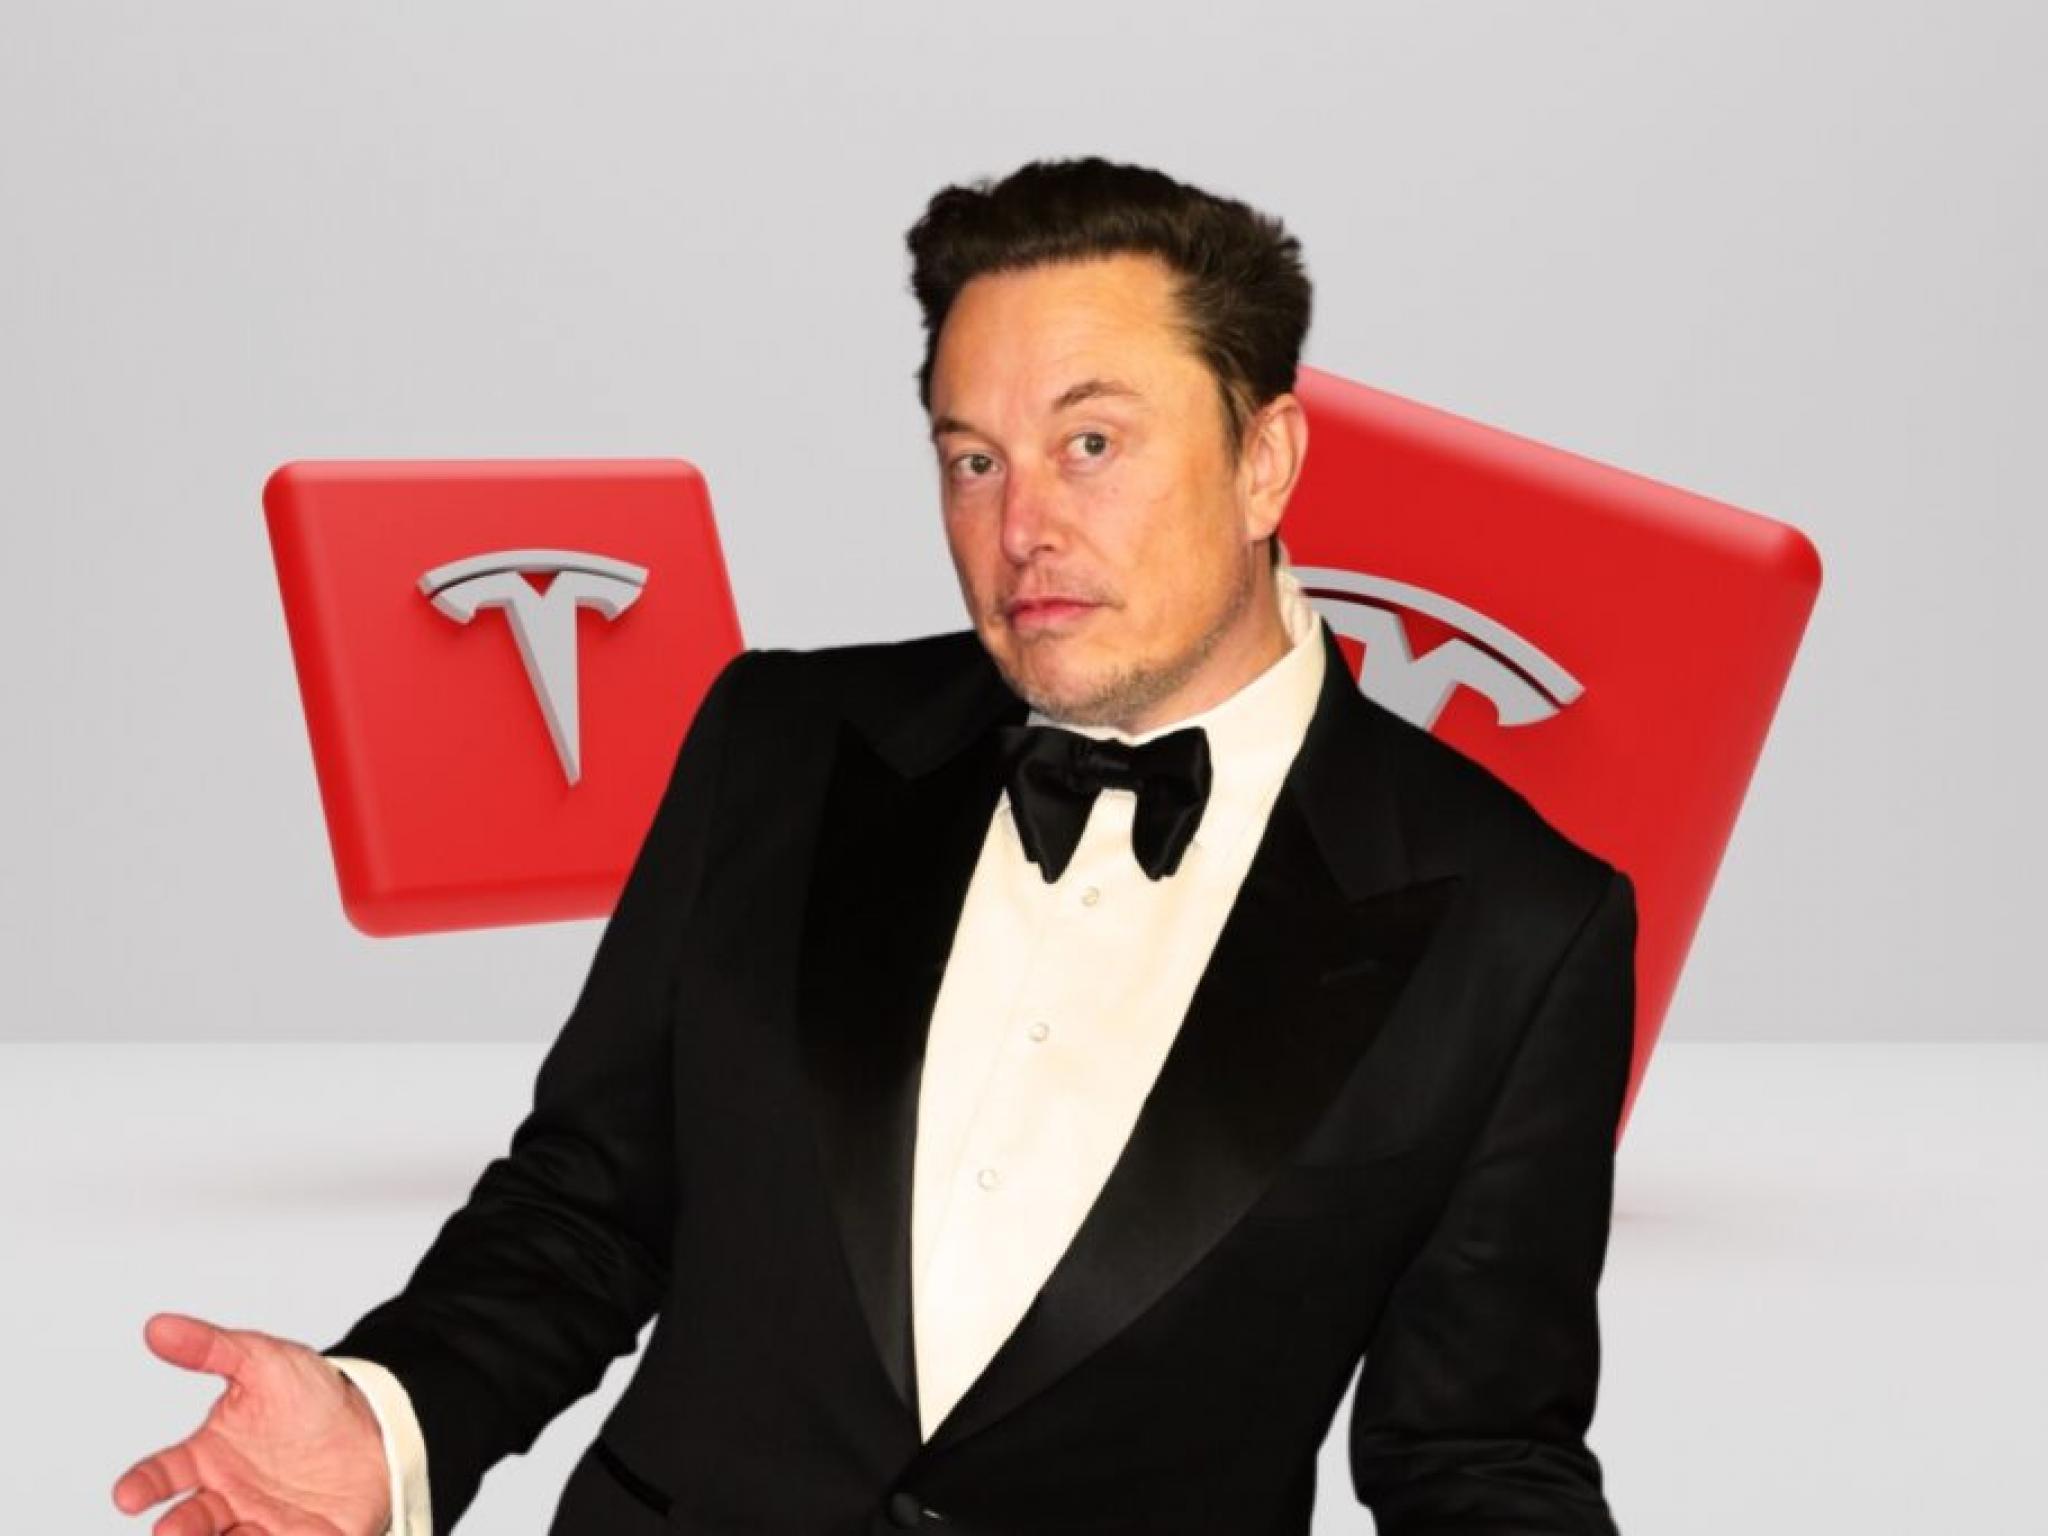  tesla-ceo-elon-musk-says-state-ev-incentives-are-seldom-used-maybe-lack-of-awareness-or-excessively-paperwork 